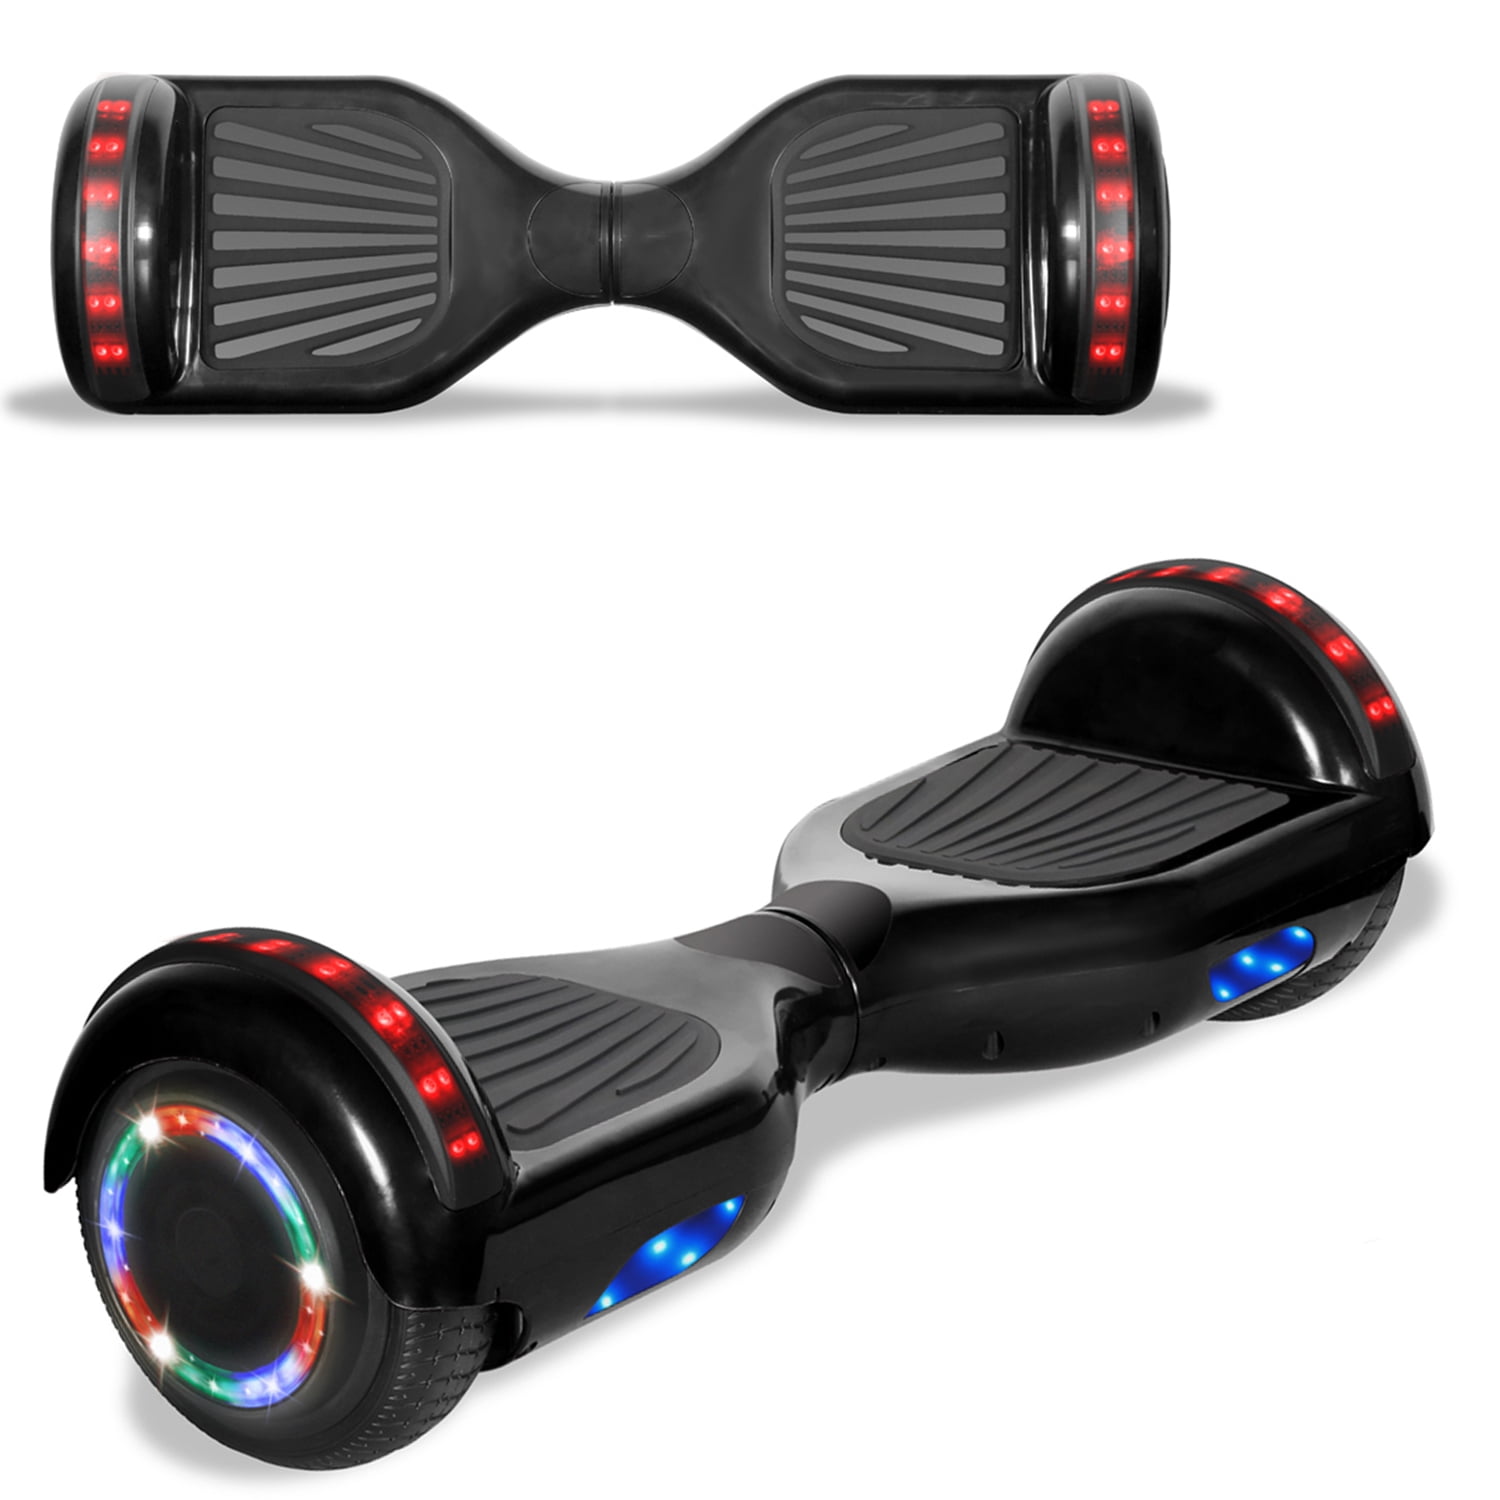 TPS Electric Hoverboard Self Balancing Scooter for Kids and Adults Hover Board with 6.5 Wheels Built-in Bluetooth Speaker Bright LED Lights UL2272 Certified 